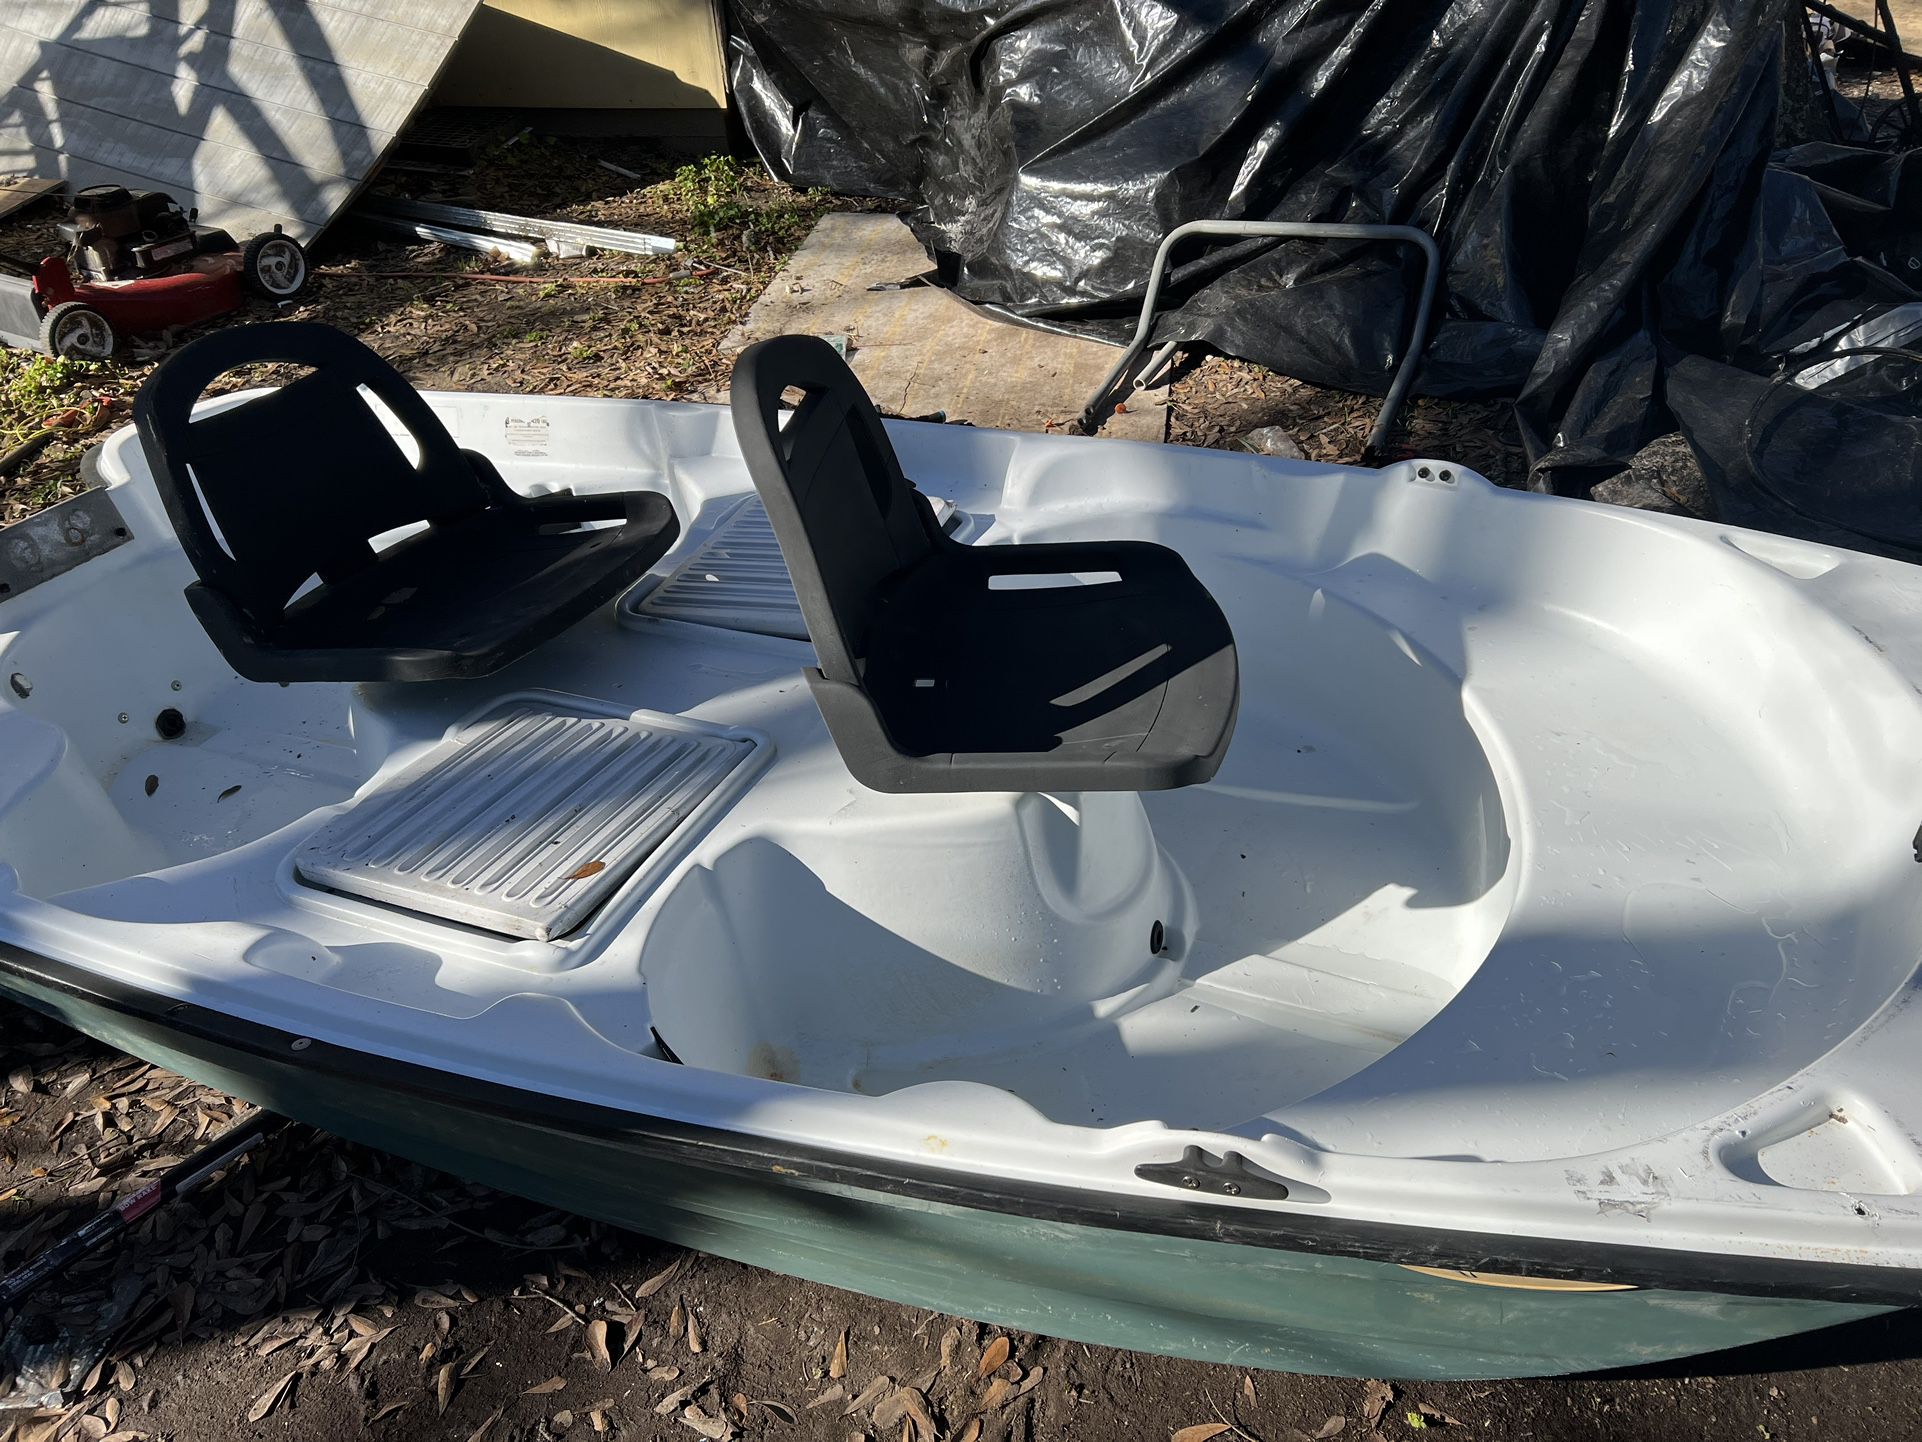 Pelican 10.3 Ft Boat for Sale in League City, TX - OfferUp